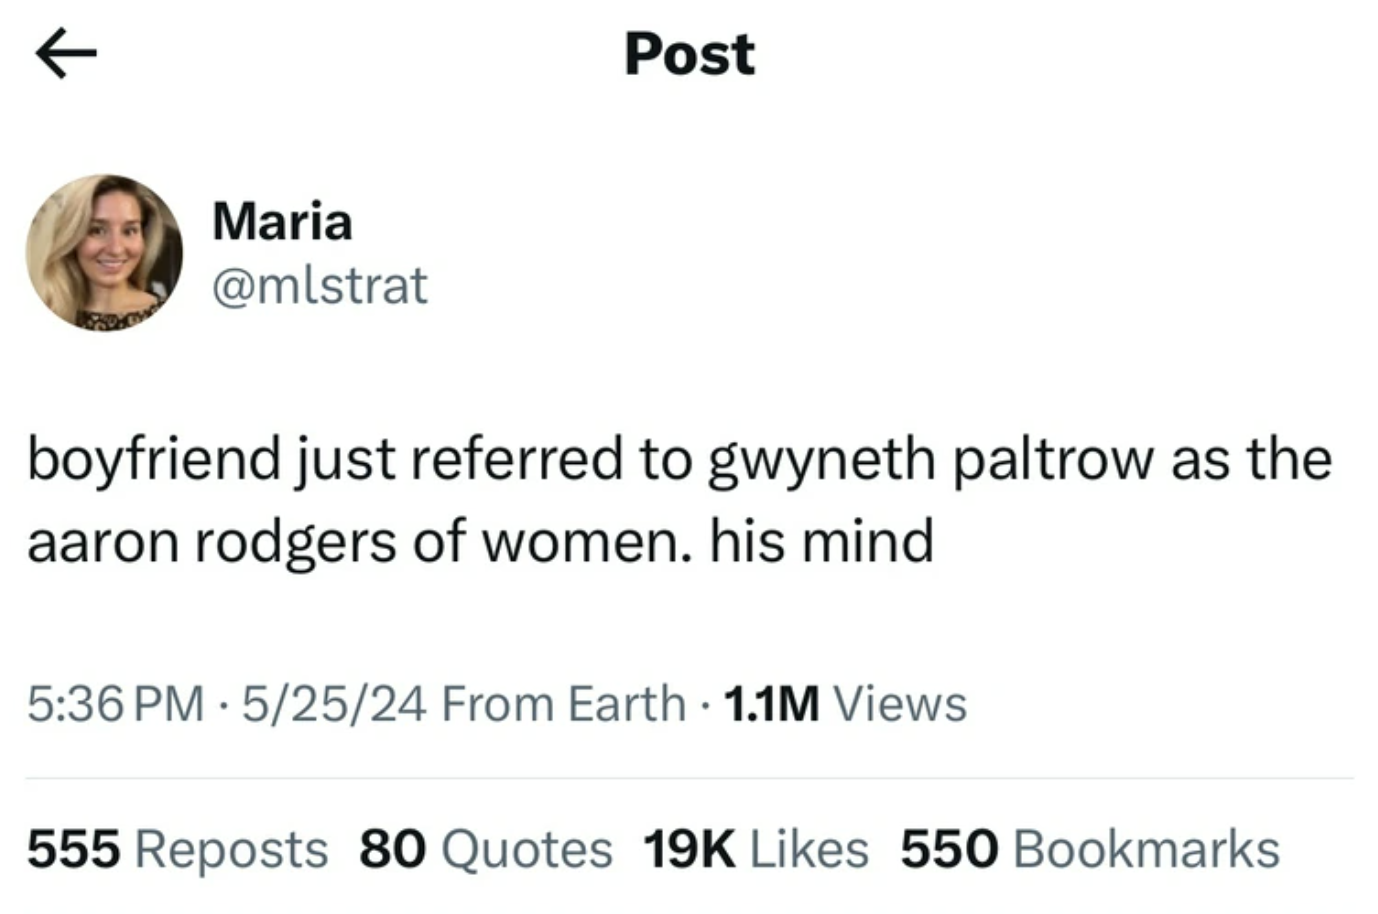 screenshot - Maria Post boyfriend just referred to gwyneth paltrow as the aaron rodgers of women. his mind 52524 From Earth 1.1M Views 555 Reposts 80 Quotes 19K 550 Bookmarks